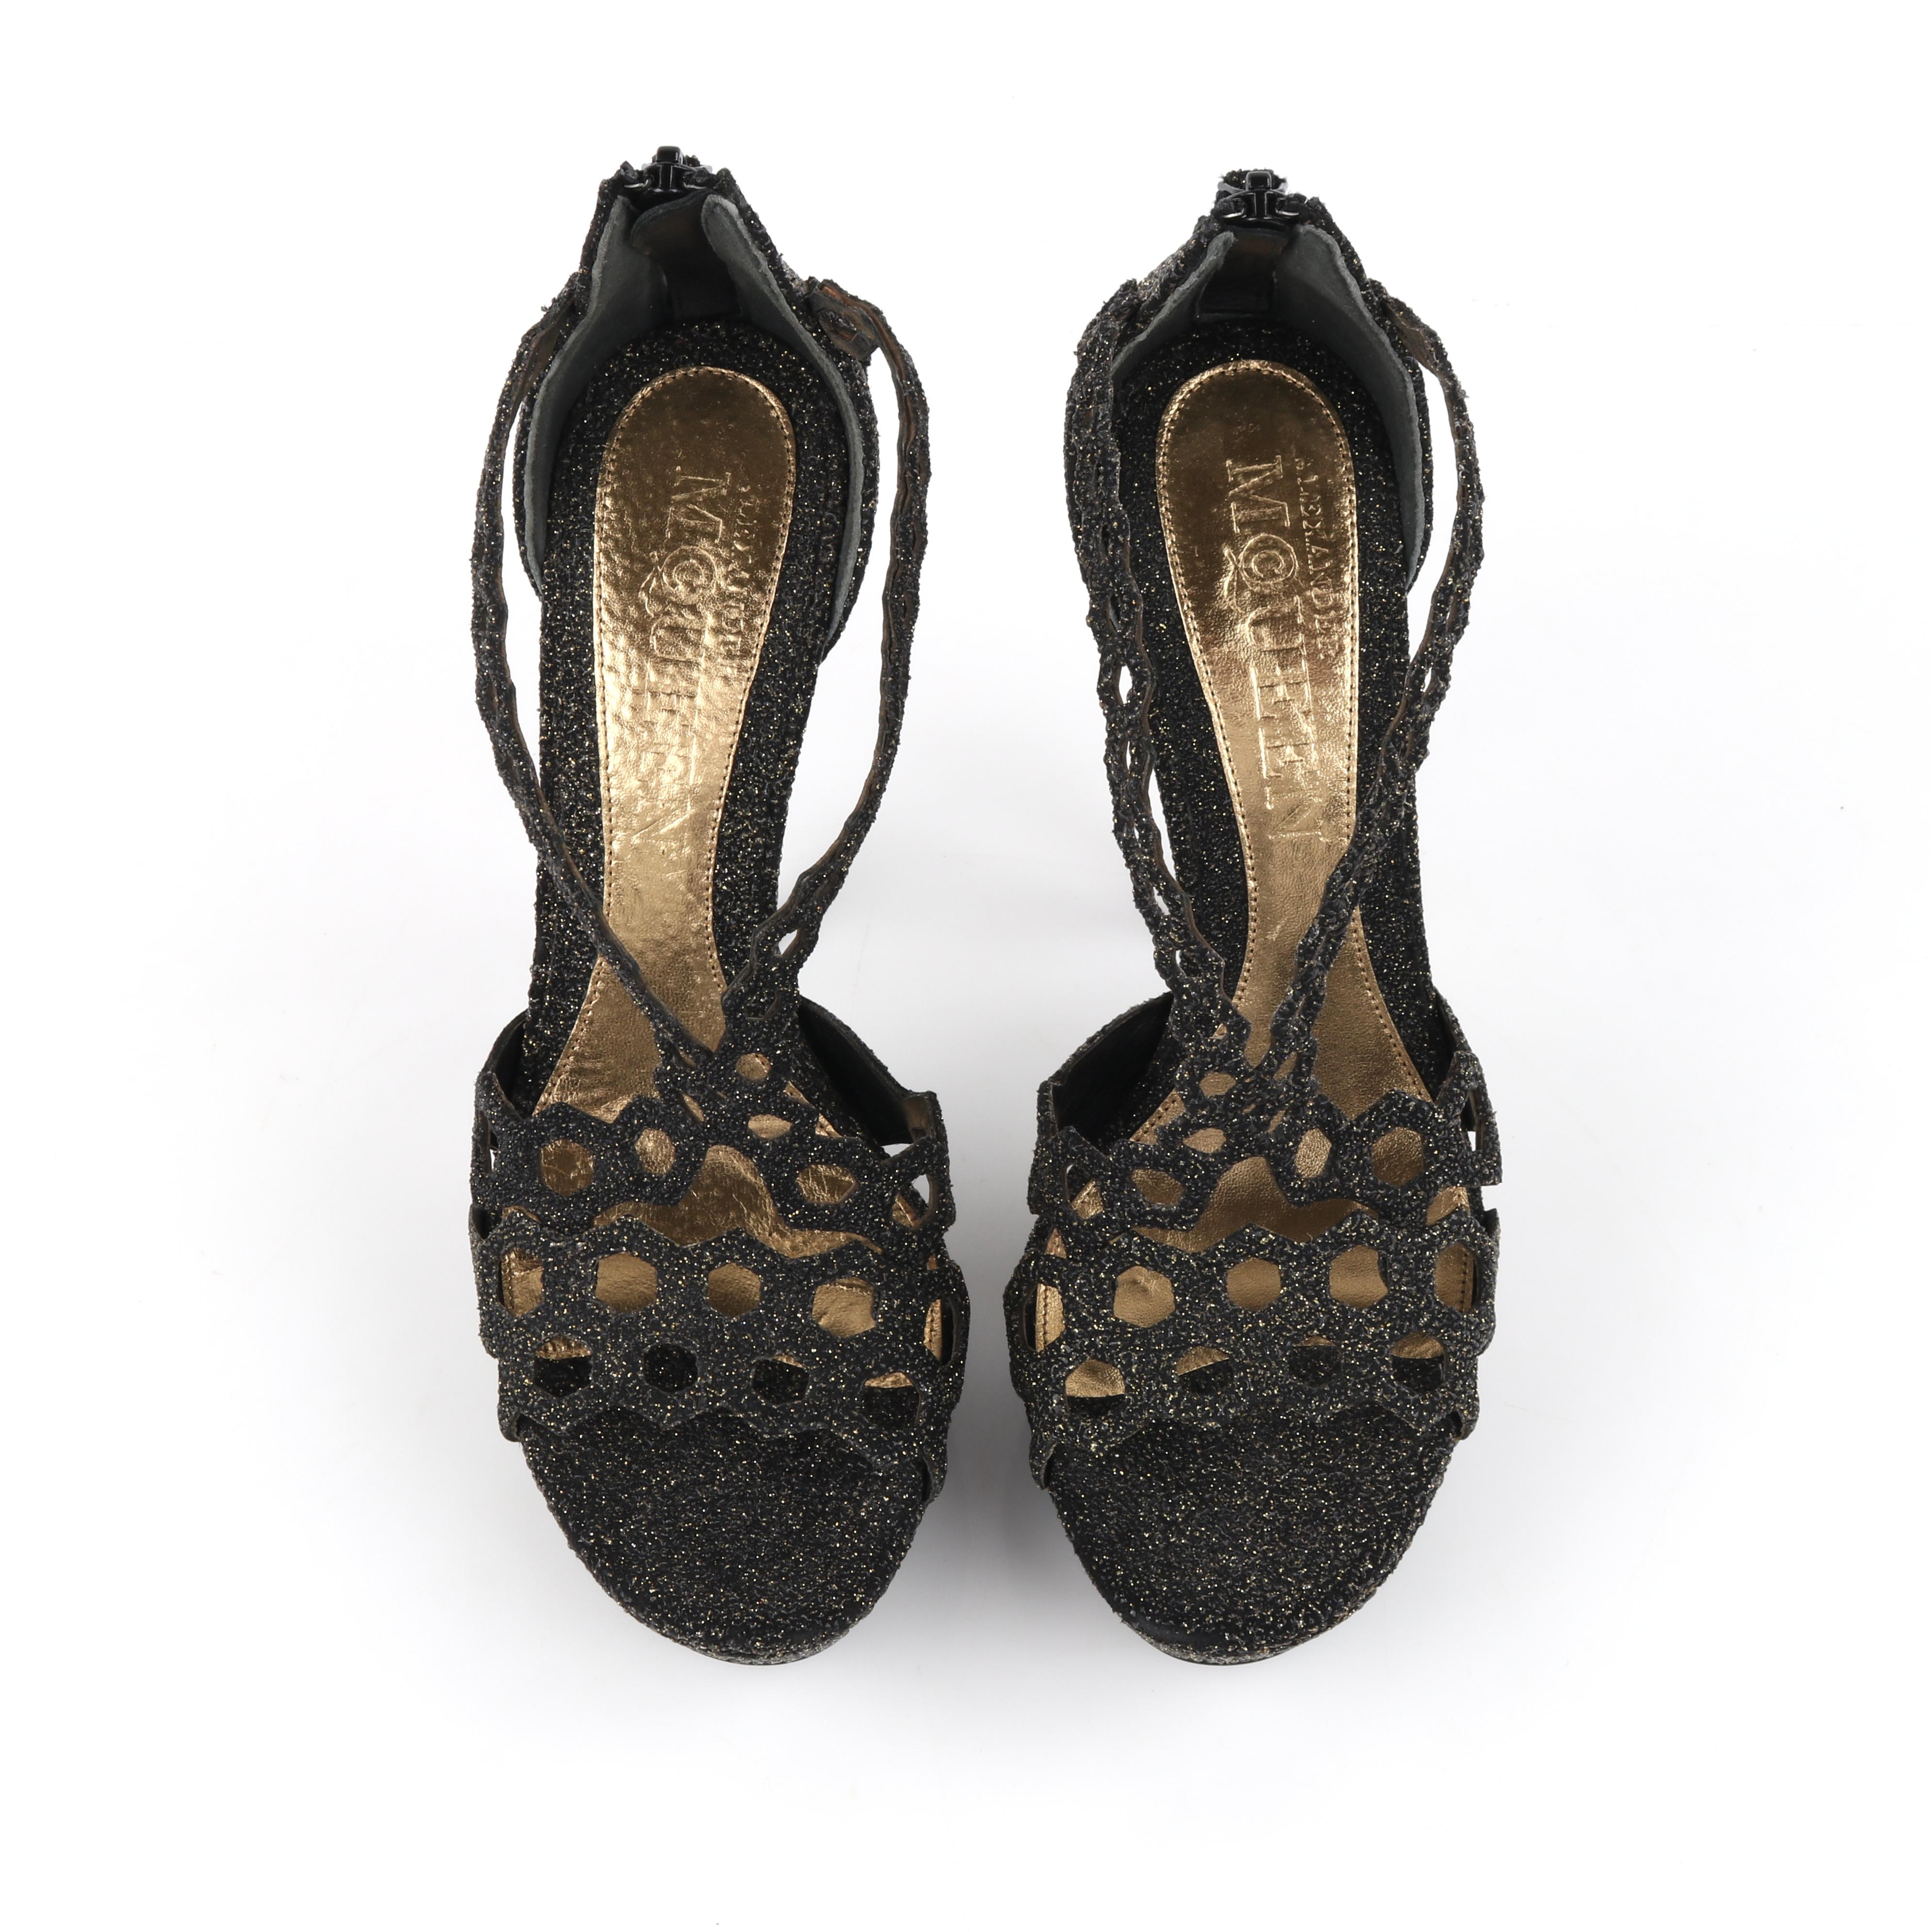 ALEXANDER McQUEEN S/S 2013 Black Gold Sparkle Honeycomb Textured Arched Heels For Sale 2